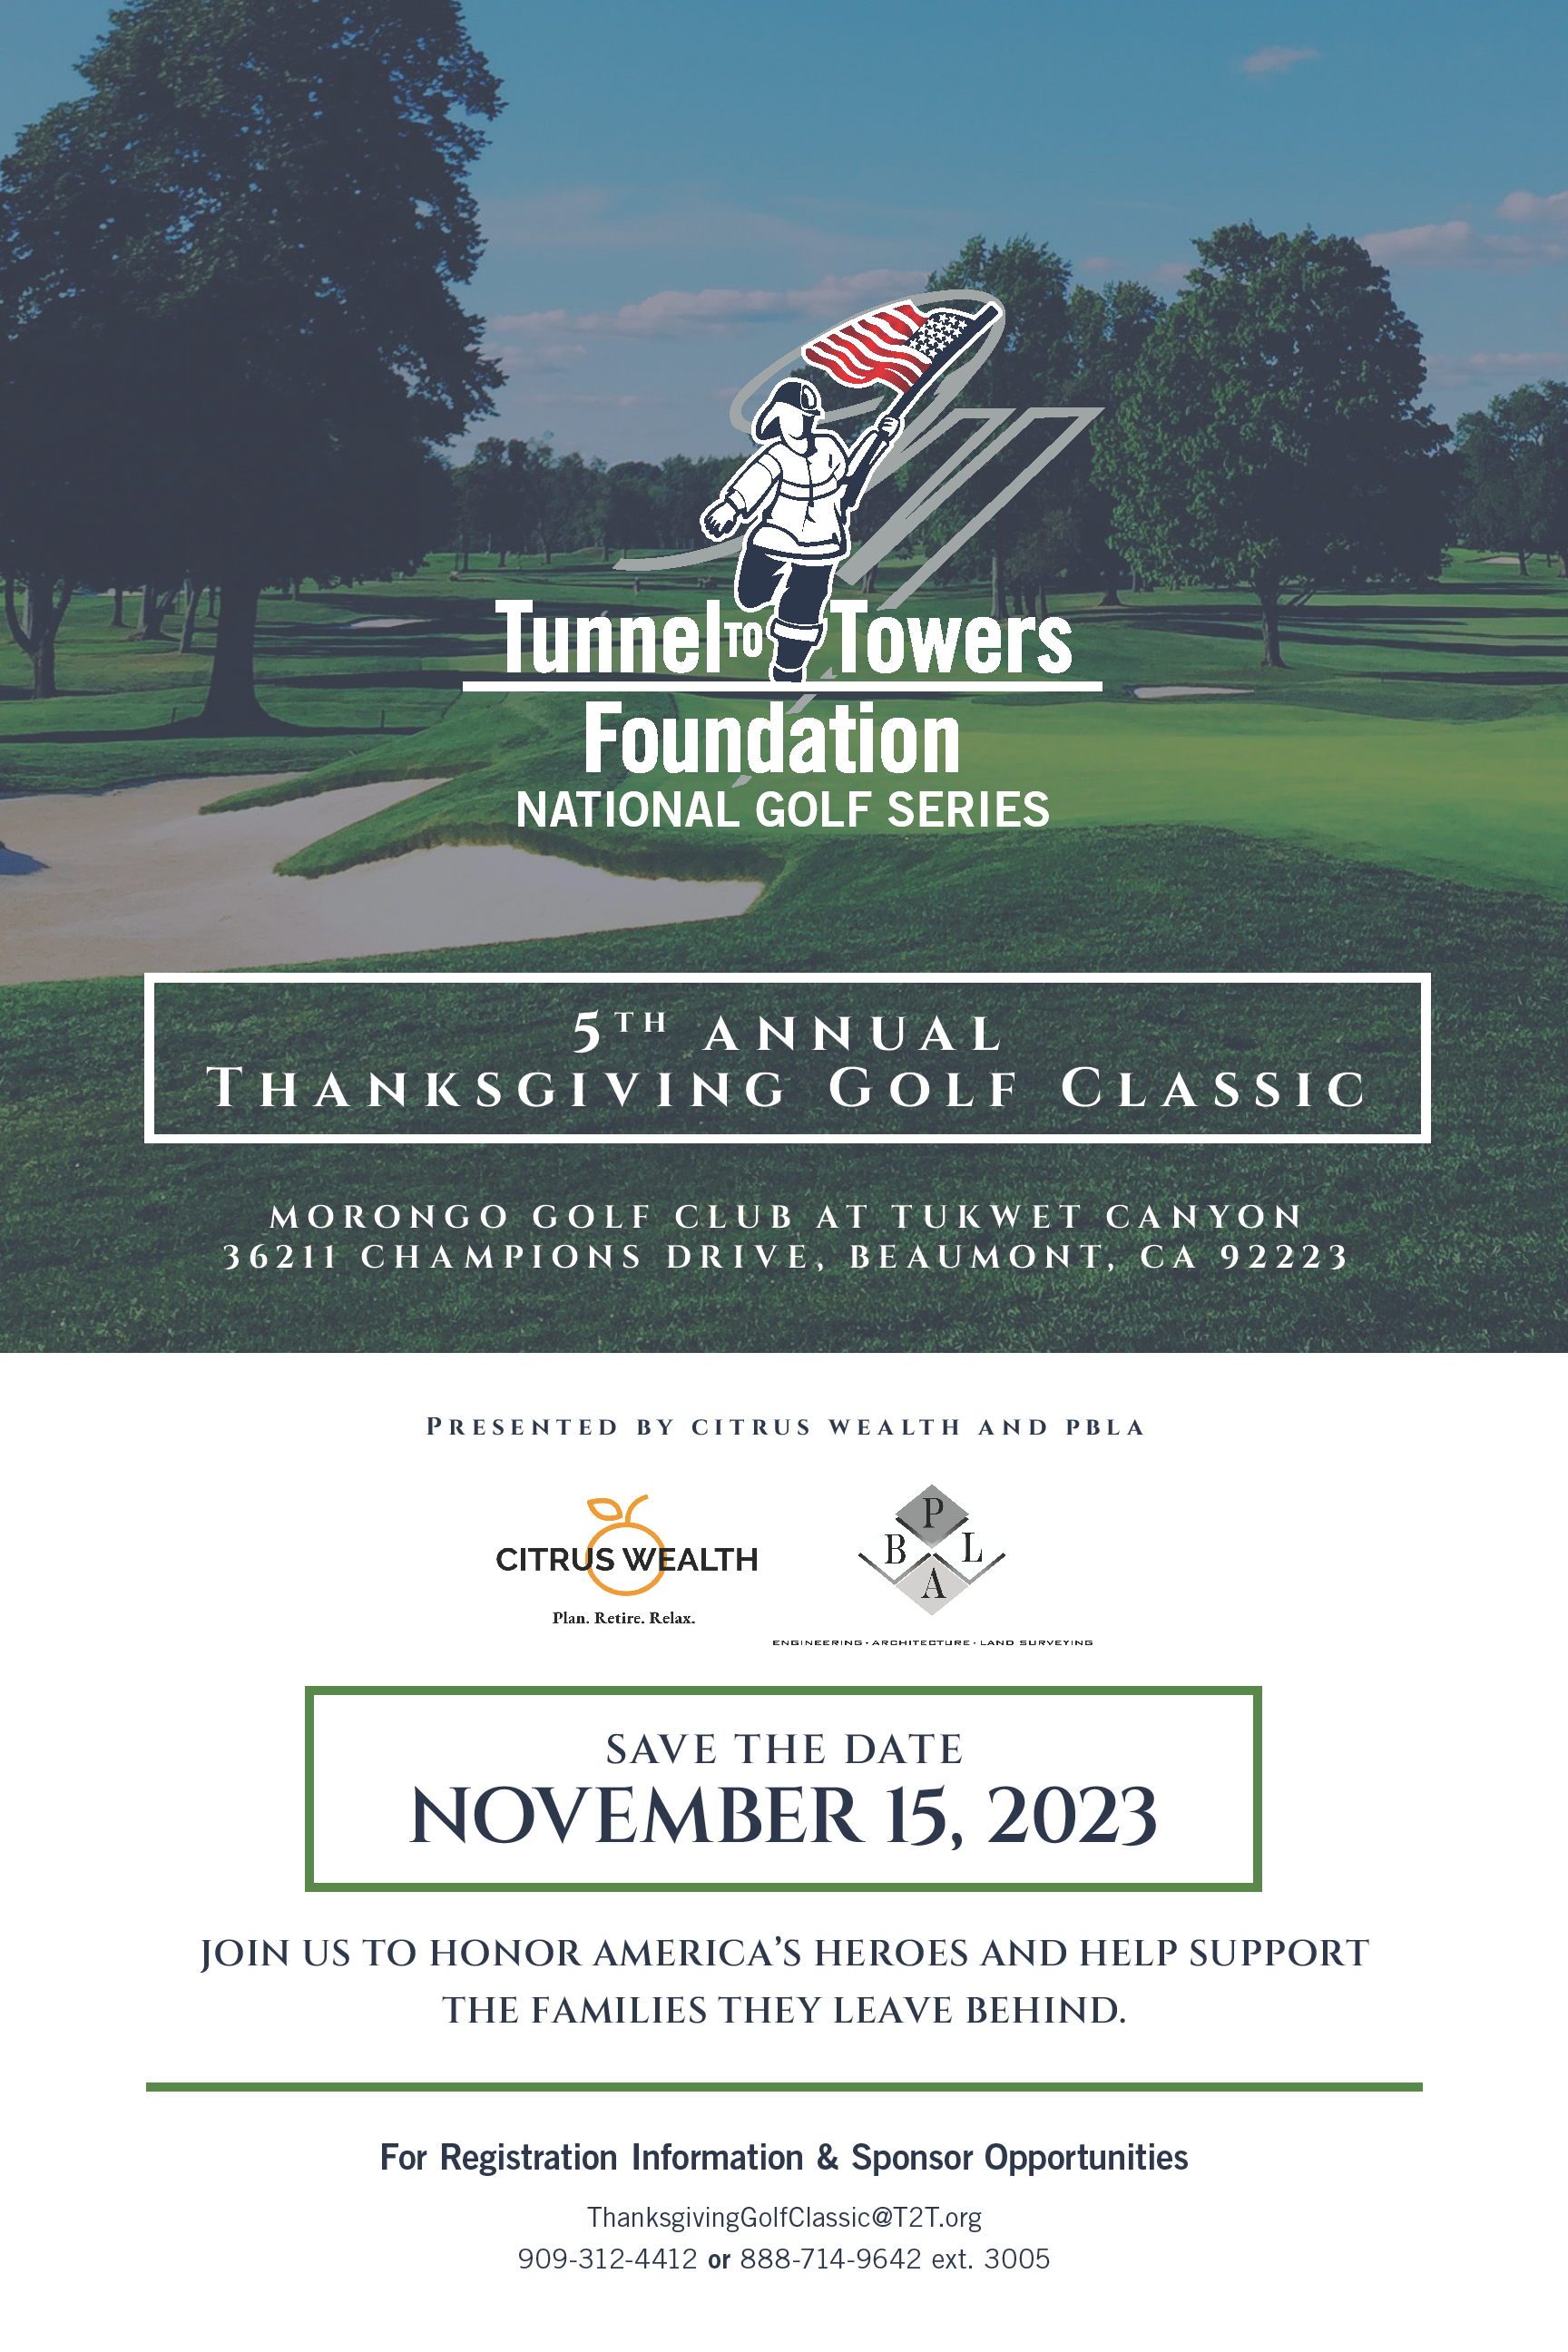 Tunnel to Towers Foundation 5th Annual Thanksgiving Golf Classic